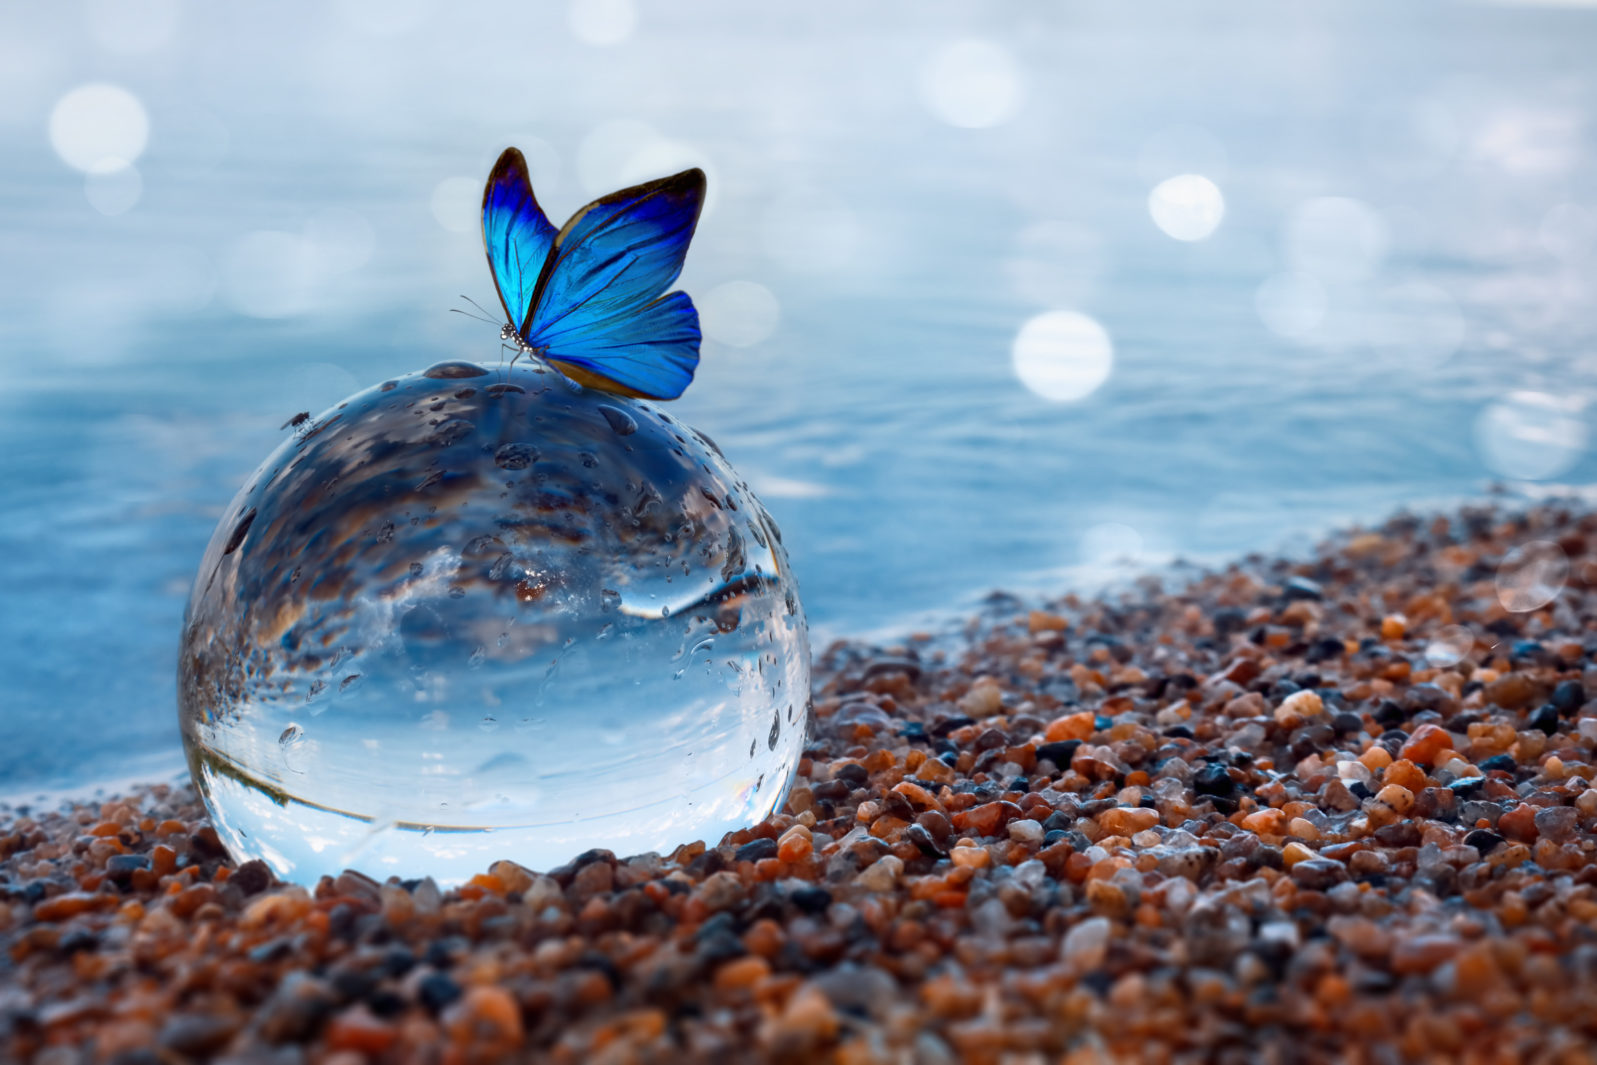 Butterfly on a glass ball on the beach refecting the lake and sky